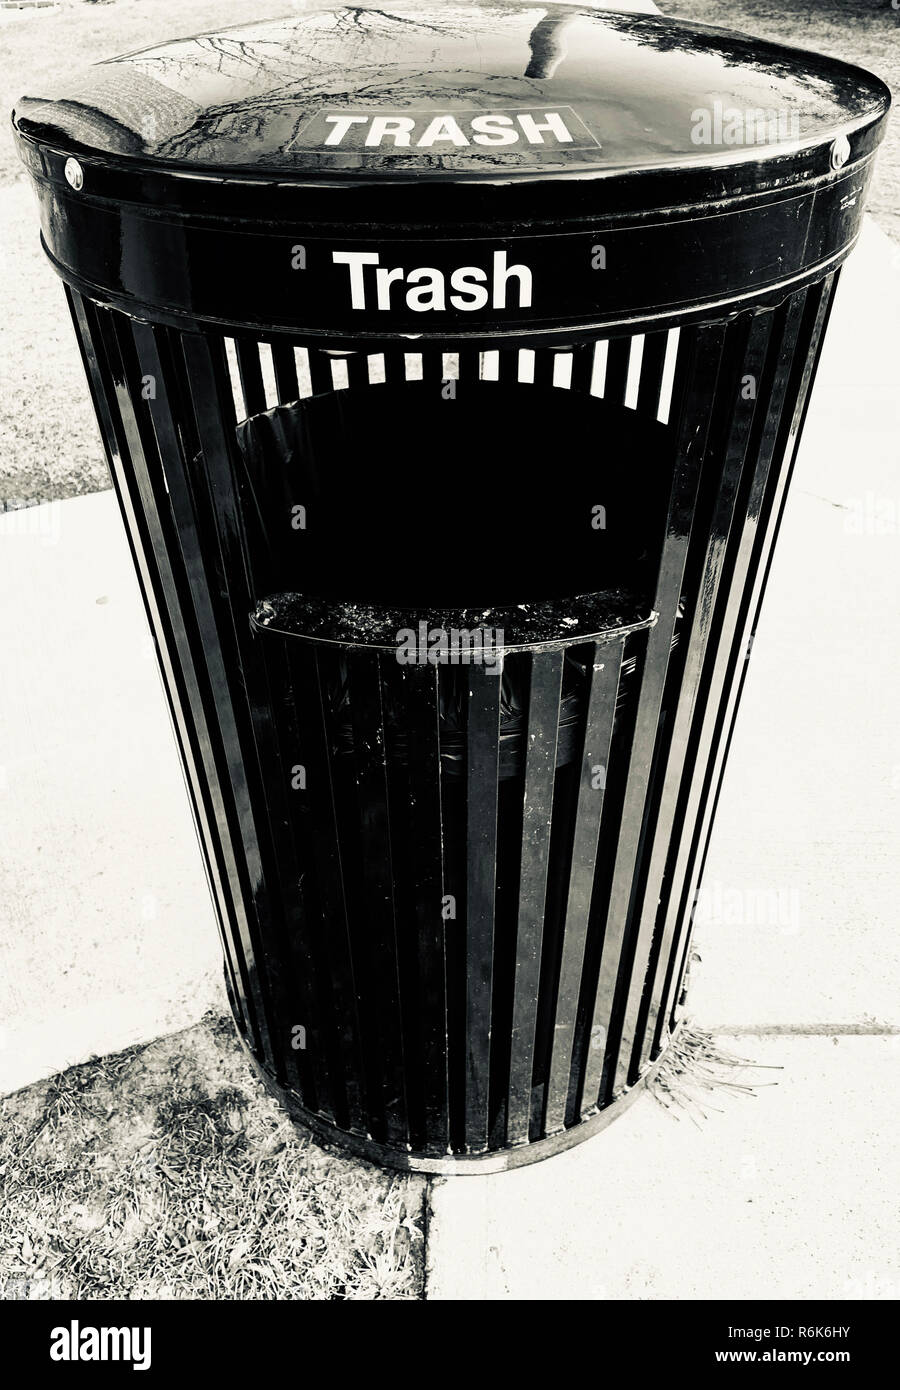 Artistic Black and White Trash Can Stock Photo